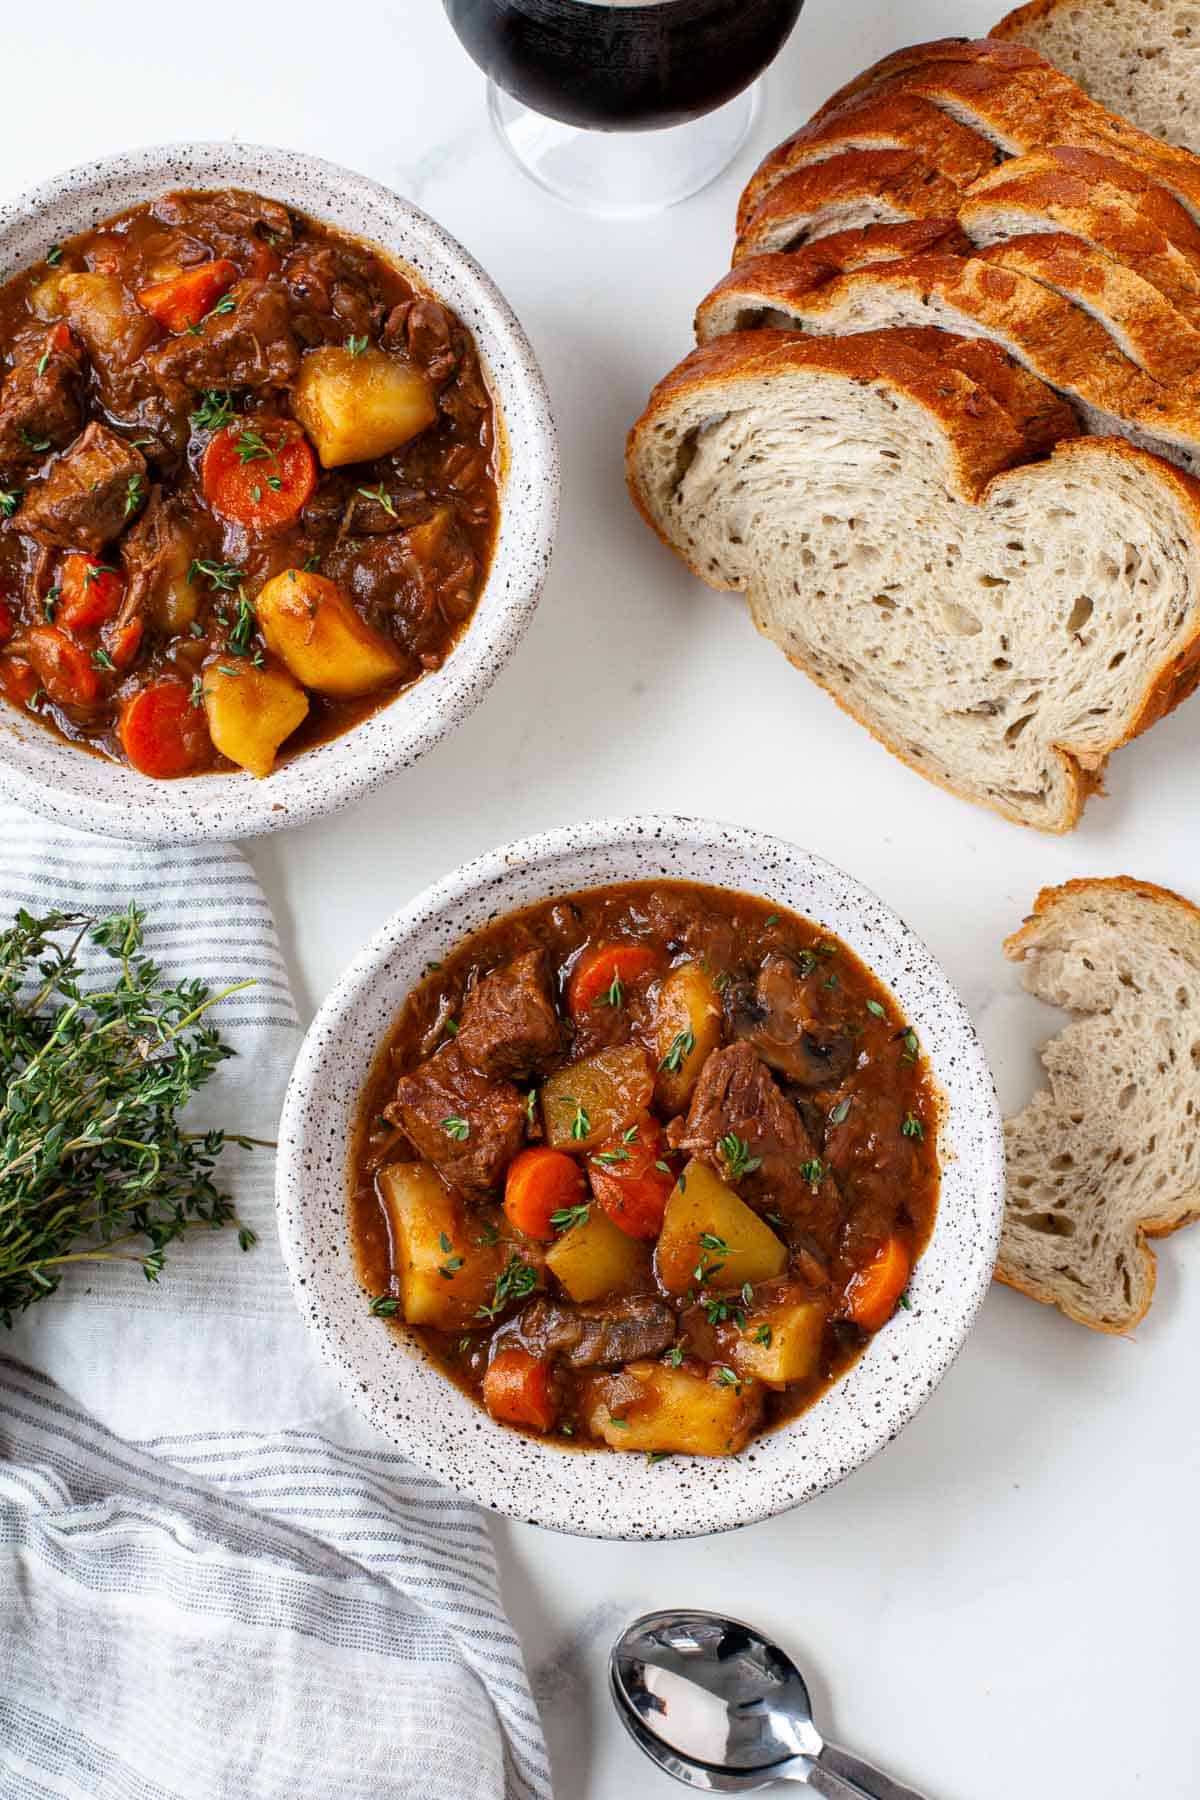 Two bowls of instant pot guiness beef stew shown. Sliced loaf of bread sits nearby. White and blue towel with greenery sits in the bottom left. Silver spoon at the bottom of the screen.